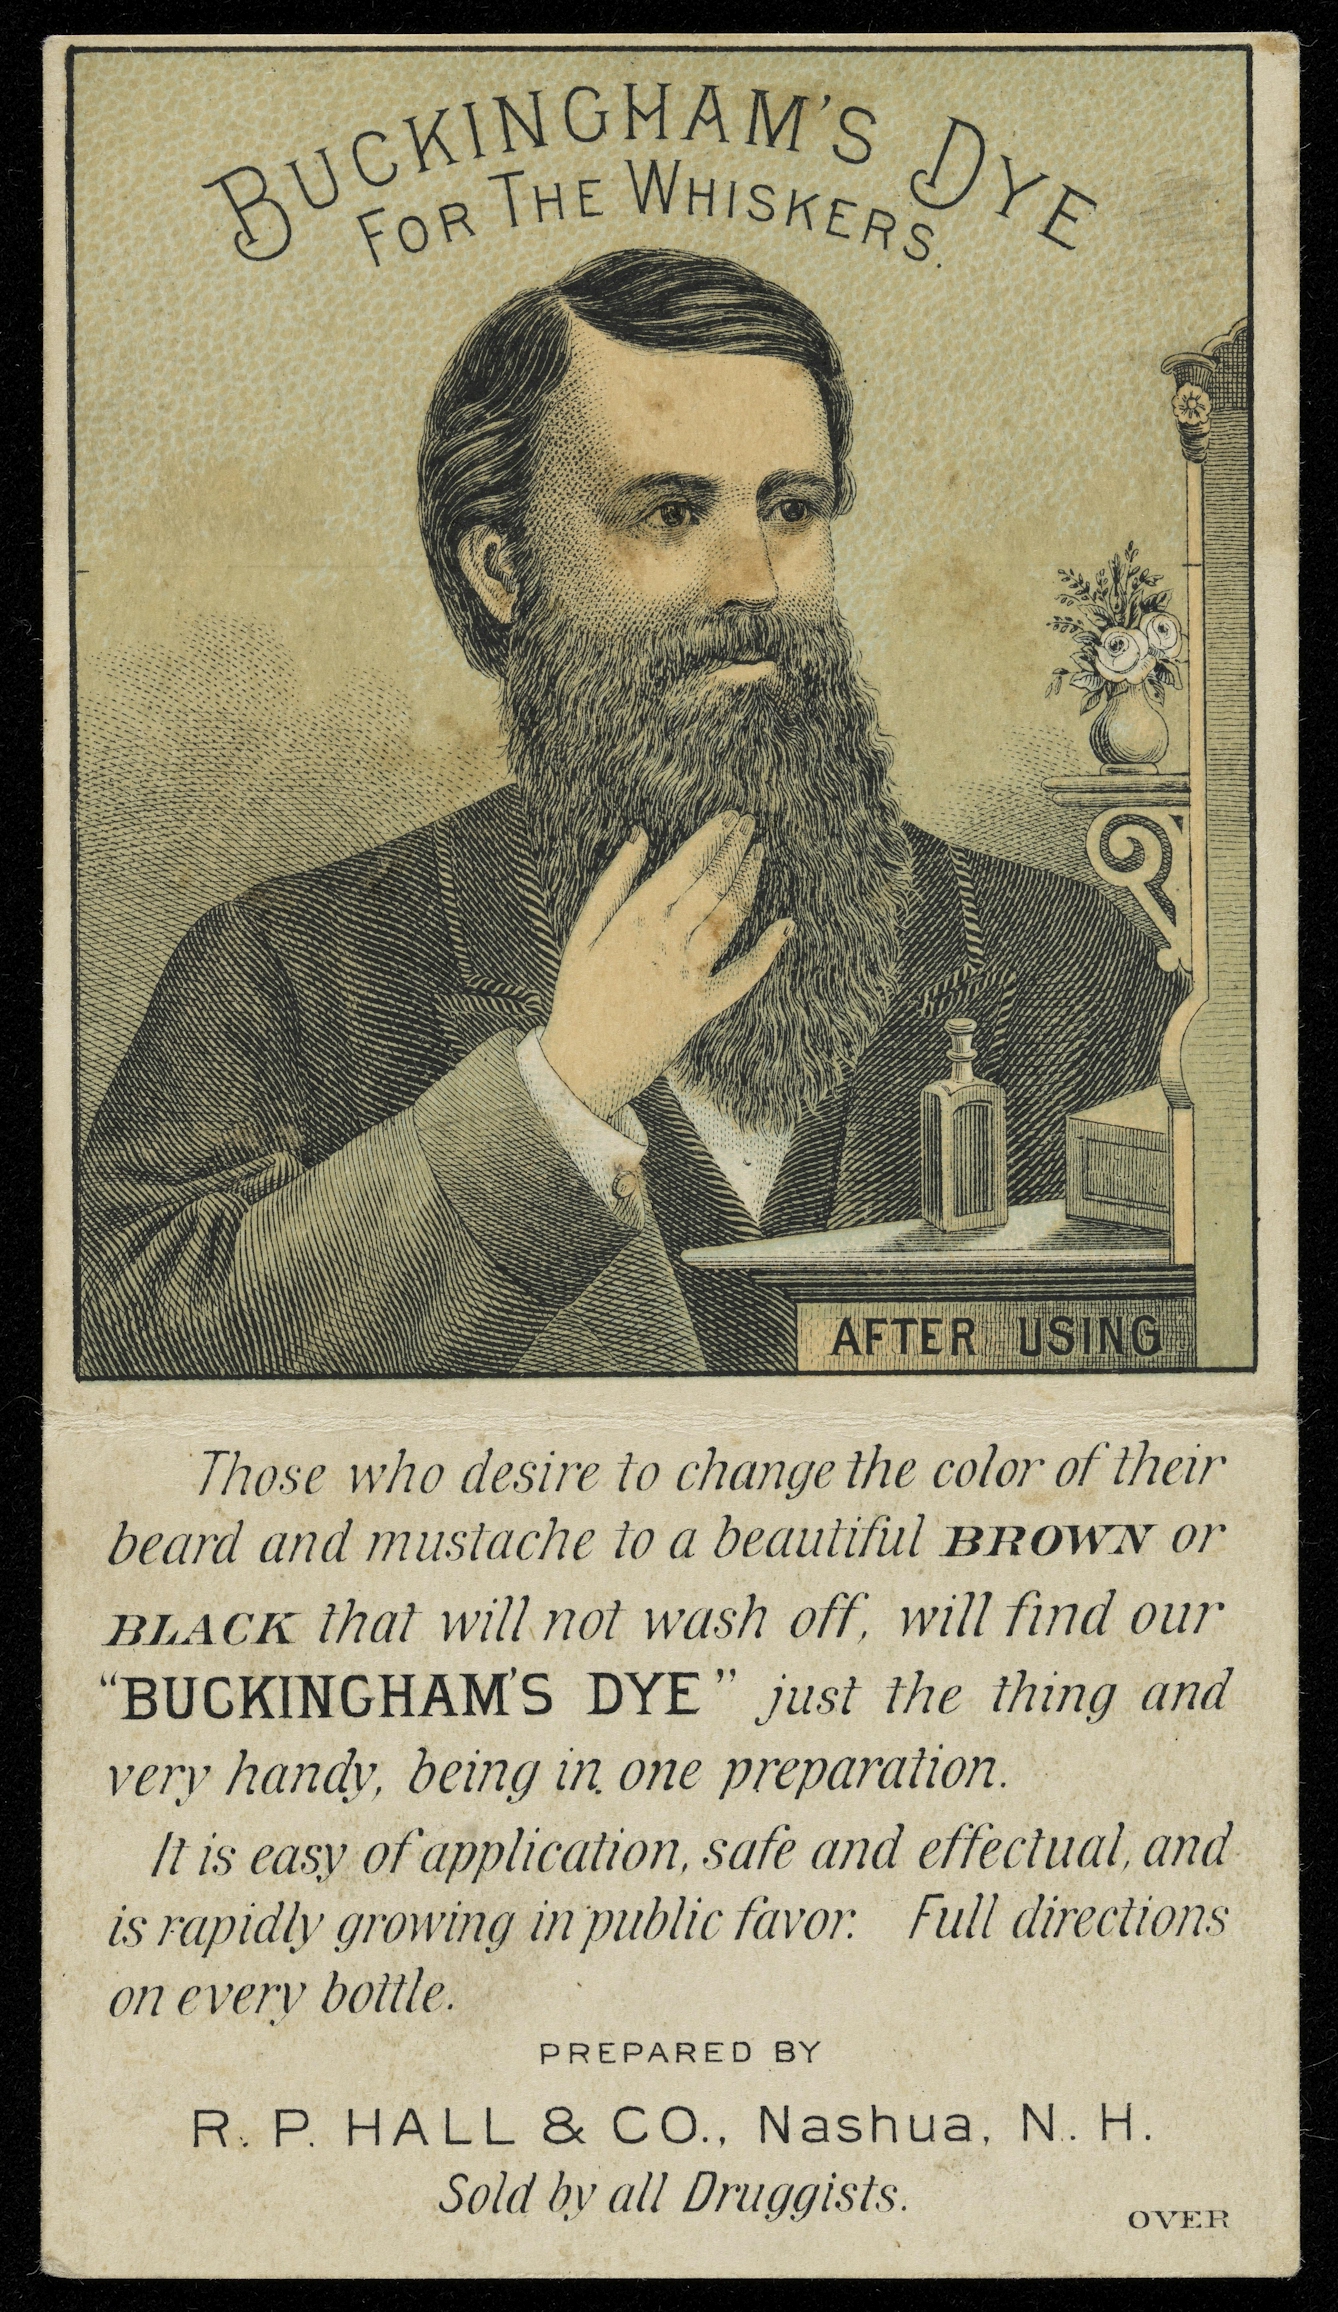 Novelty advertising leaflet showing a colour illustration of a man with a luxurious black beard ('after using' Buckingham's Dye for the Whiskers ).  Below the image is the following text: 'Those who desire to change the color of their beard and mustache to a beautiful BROWN or BLACK that will not wash off, will find our "BUCKINGHAM'S DYE" just the thing and very handy, being in one preparation.  It is easy of application, safe and effectual, and is rapidly growing in public favor.  Full directions on every bottle.  Prepared by R. P. Hall & Co., Nashua, N. H.  Sold by all Druggists.'